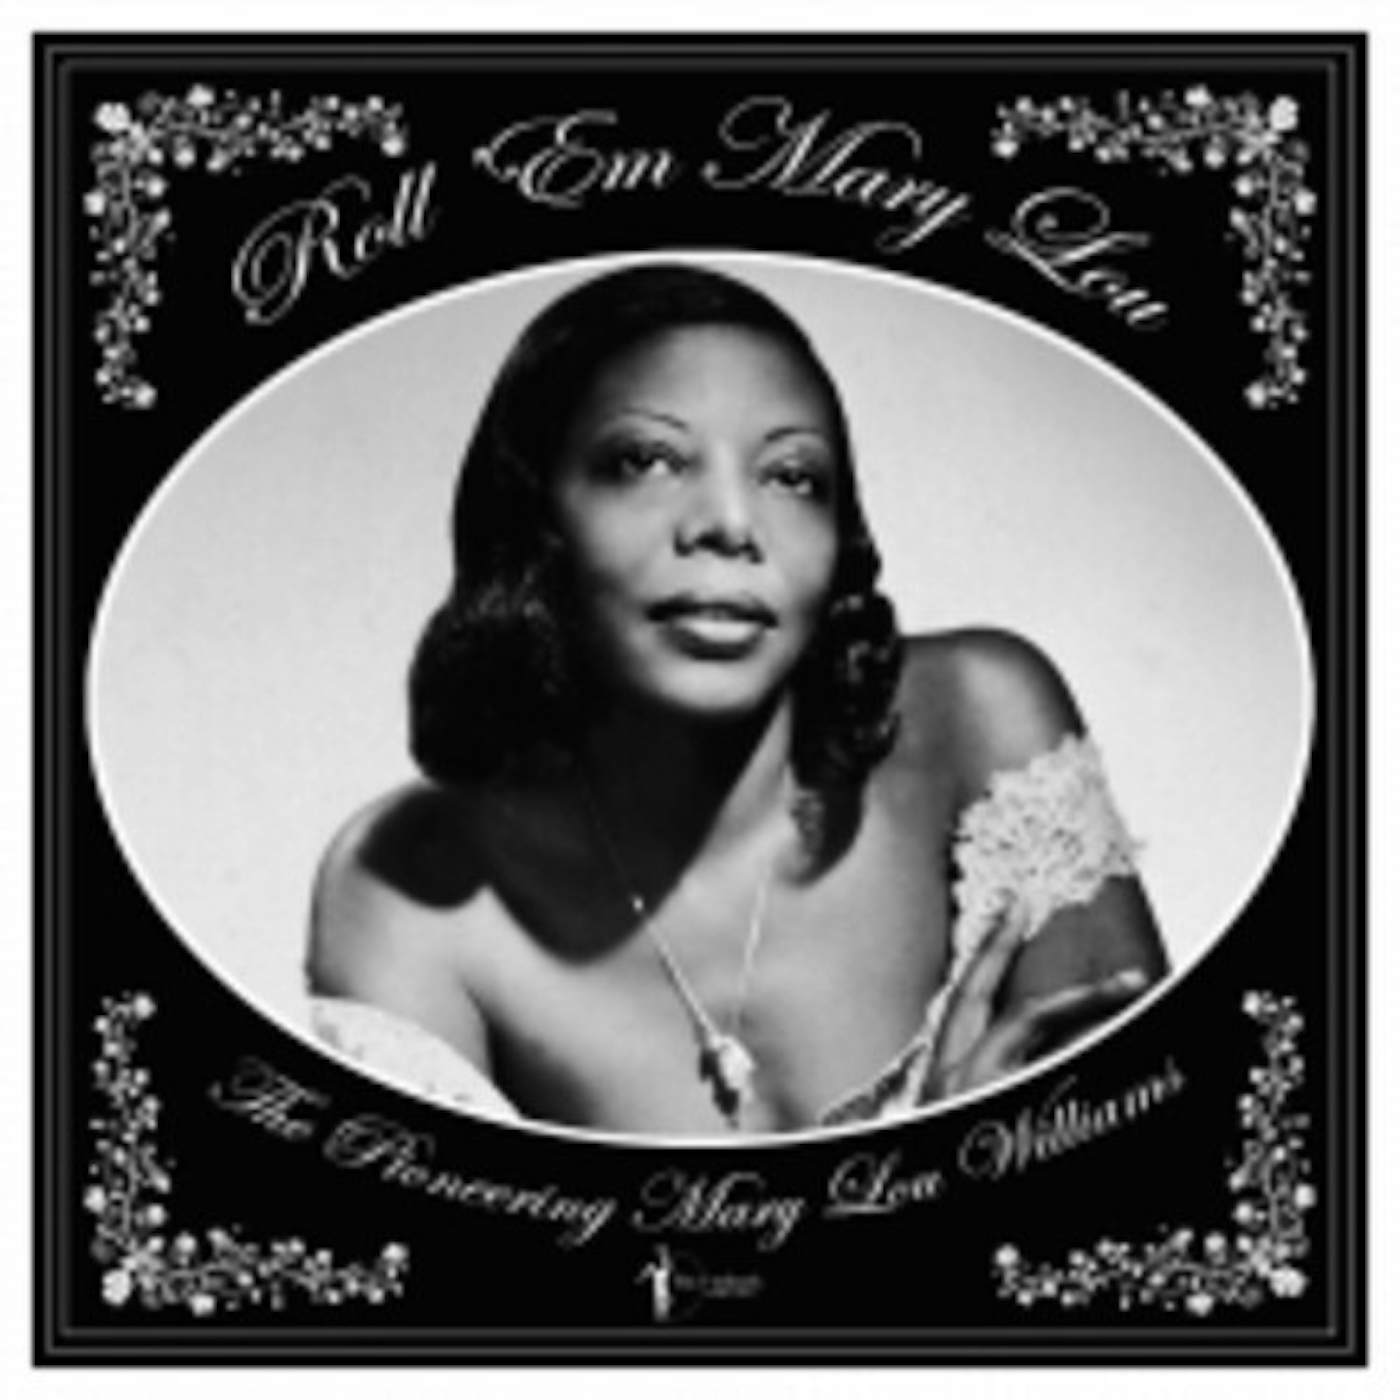 Mary Lou Williams ROLL 'EM MARY LOU: THE PIONEERING MARY LOU Vinyl Record